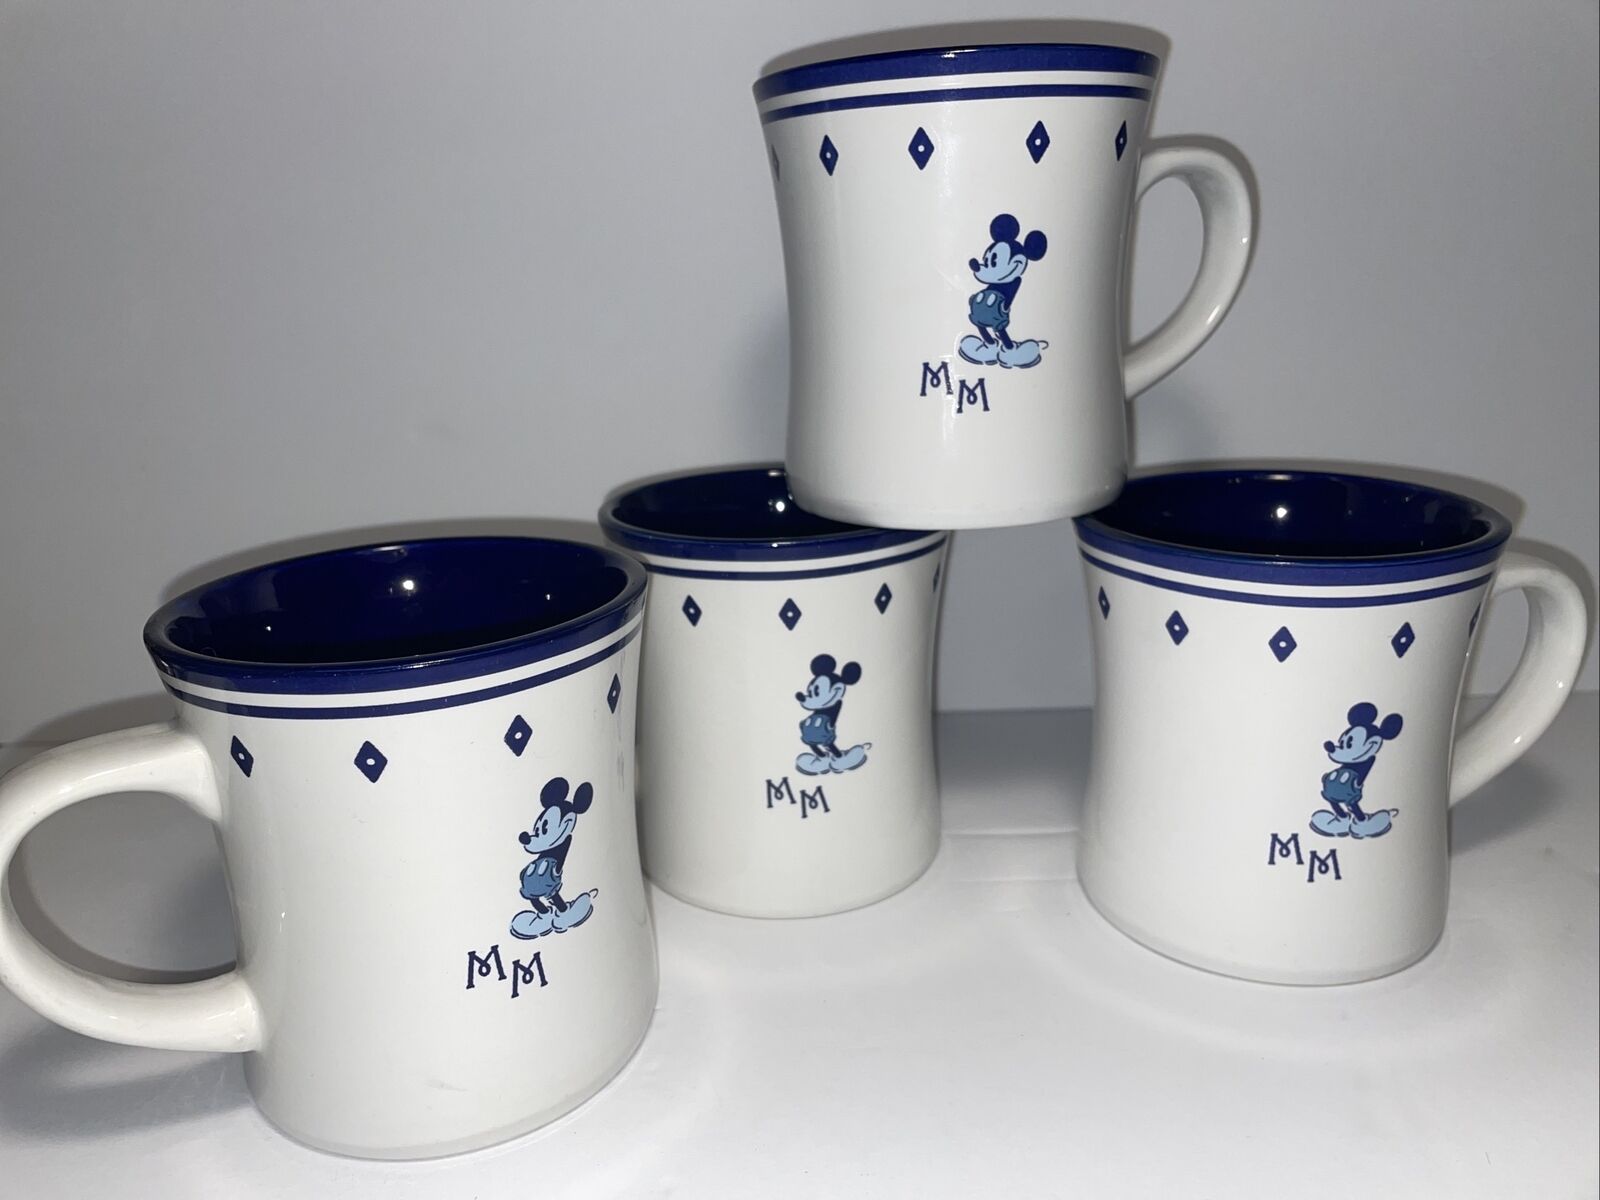 Set of 4 Disney Mickey Mouse Mugs Blue and White MM Monogram Discontinued Design